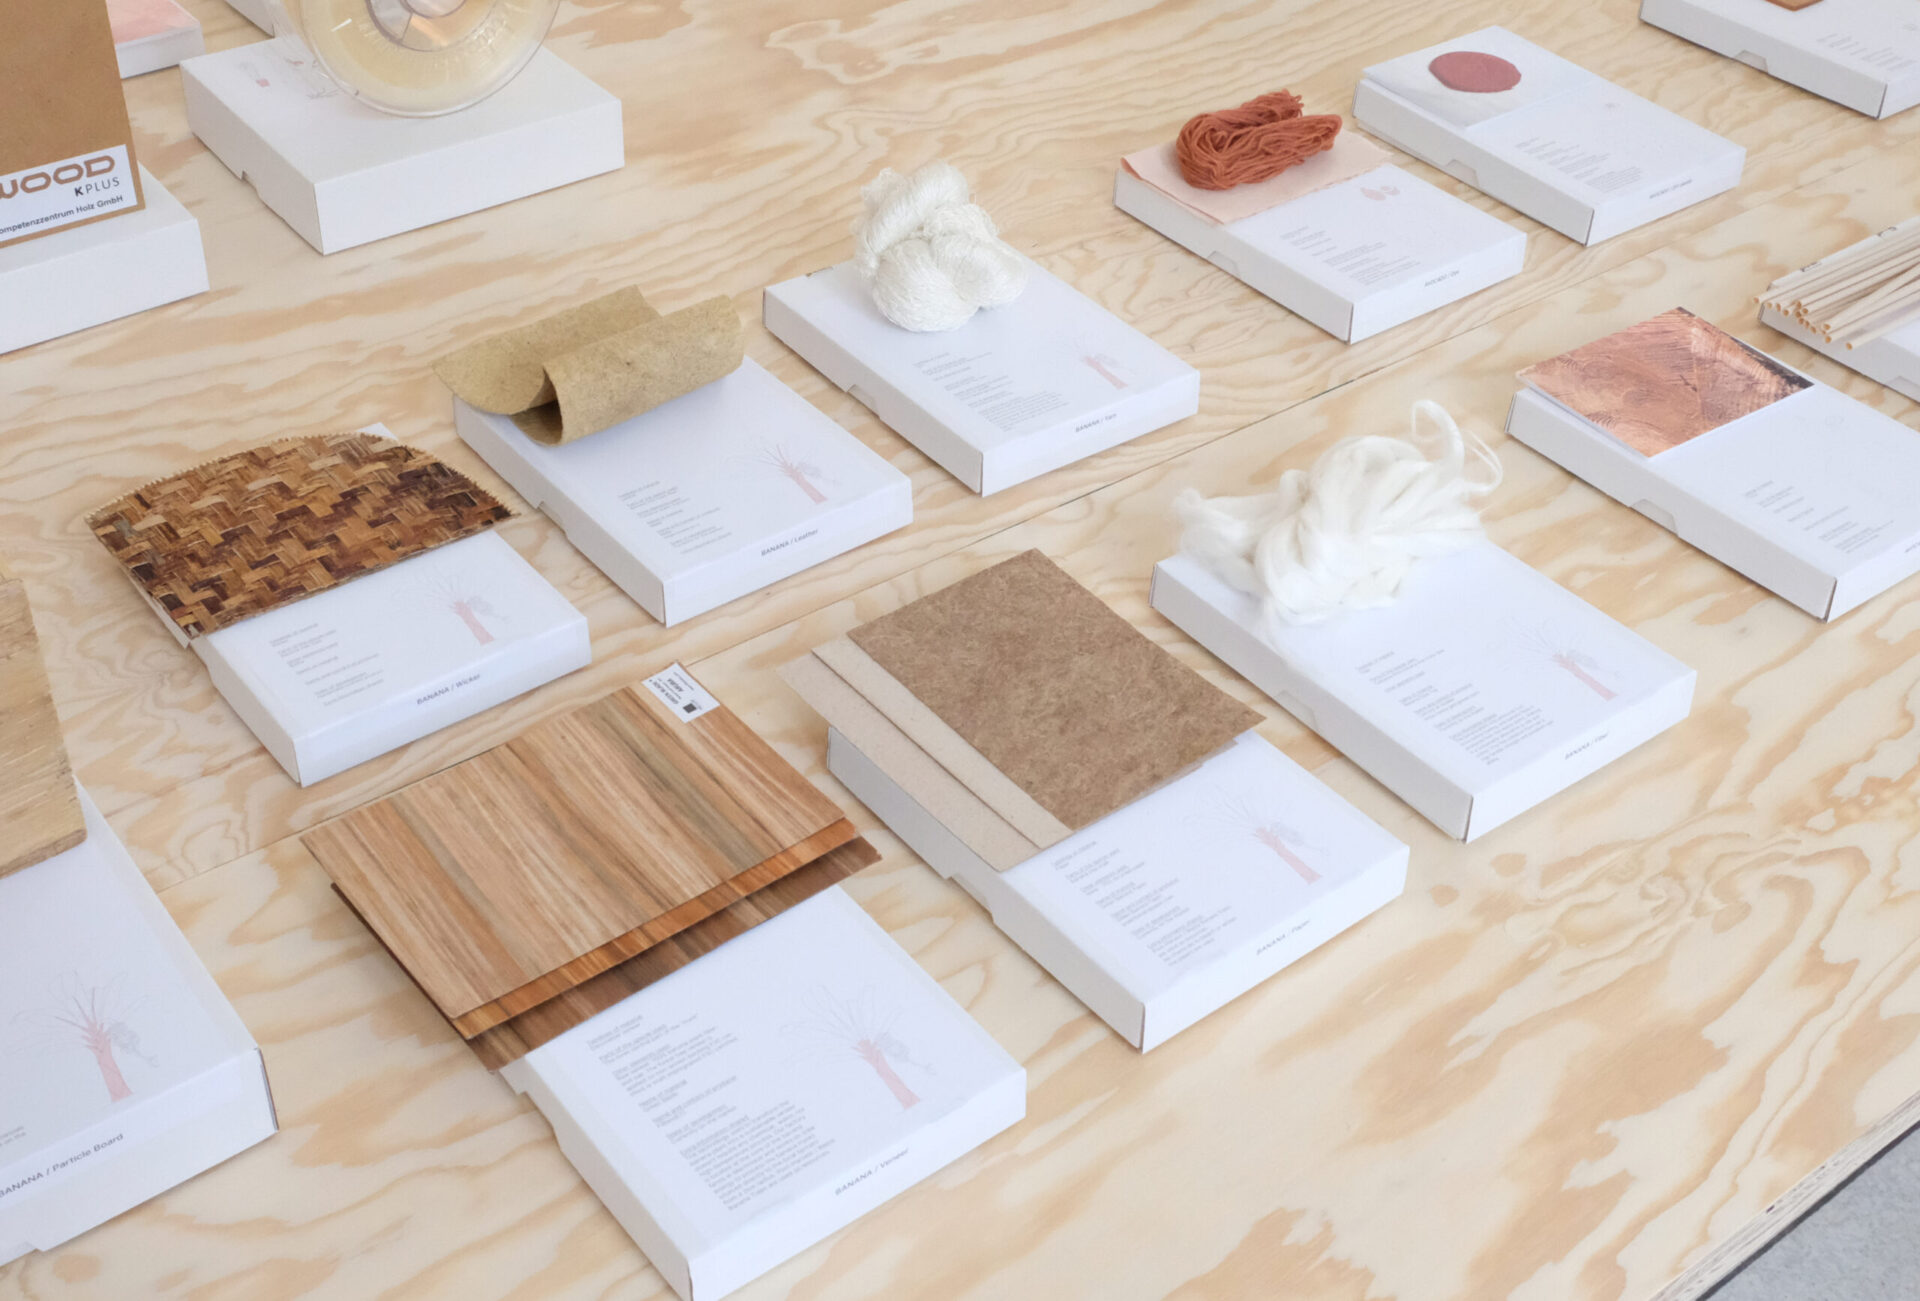 Eugenia Morpurgo "Syntropic Materials" an attempt to design regenerative production processes for traditional and innovative plant/animal based materials using agricultural leftovers from regenerative, polycultural, agroforestal agriculture - Design Collectibles